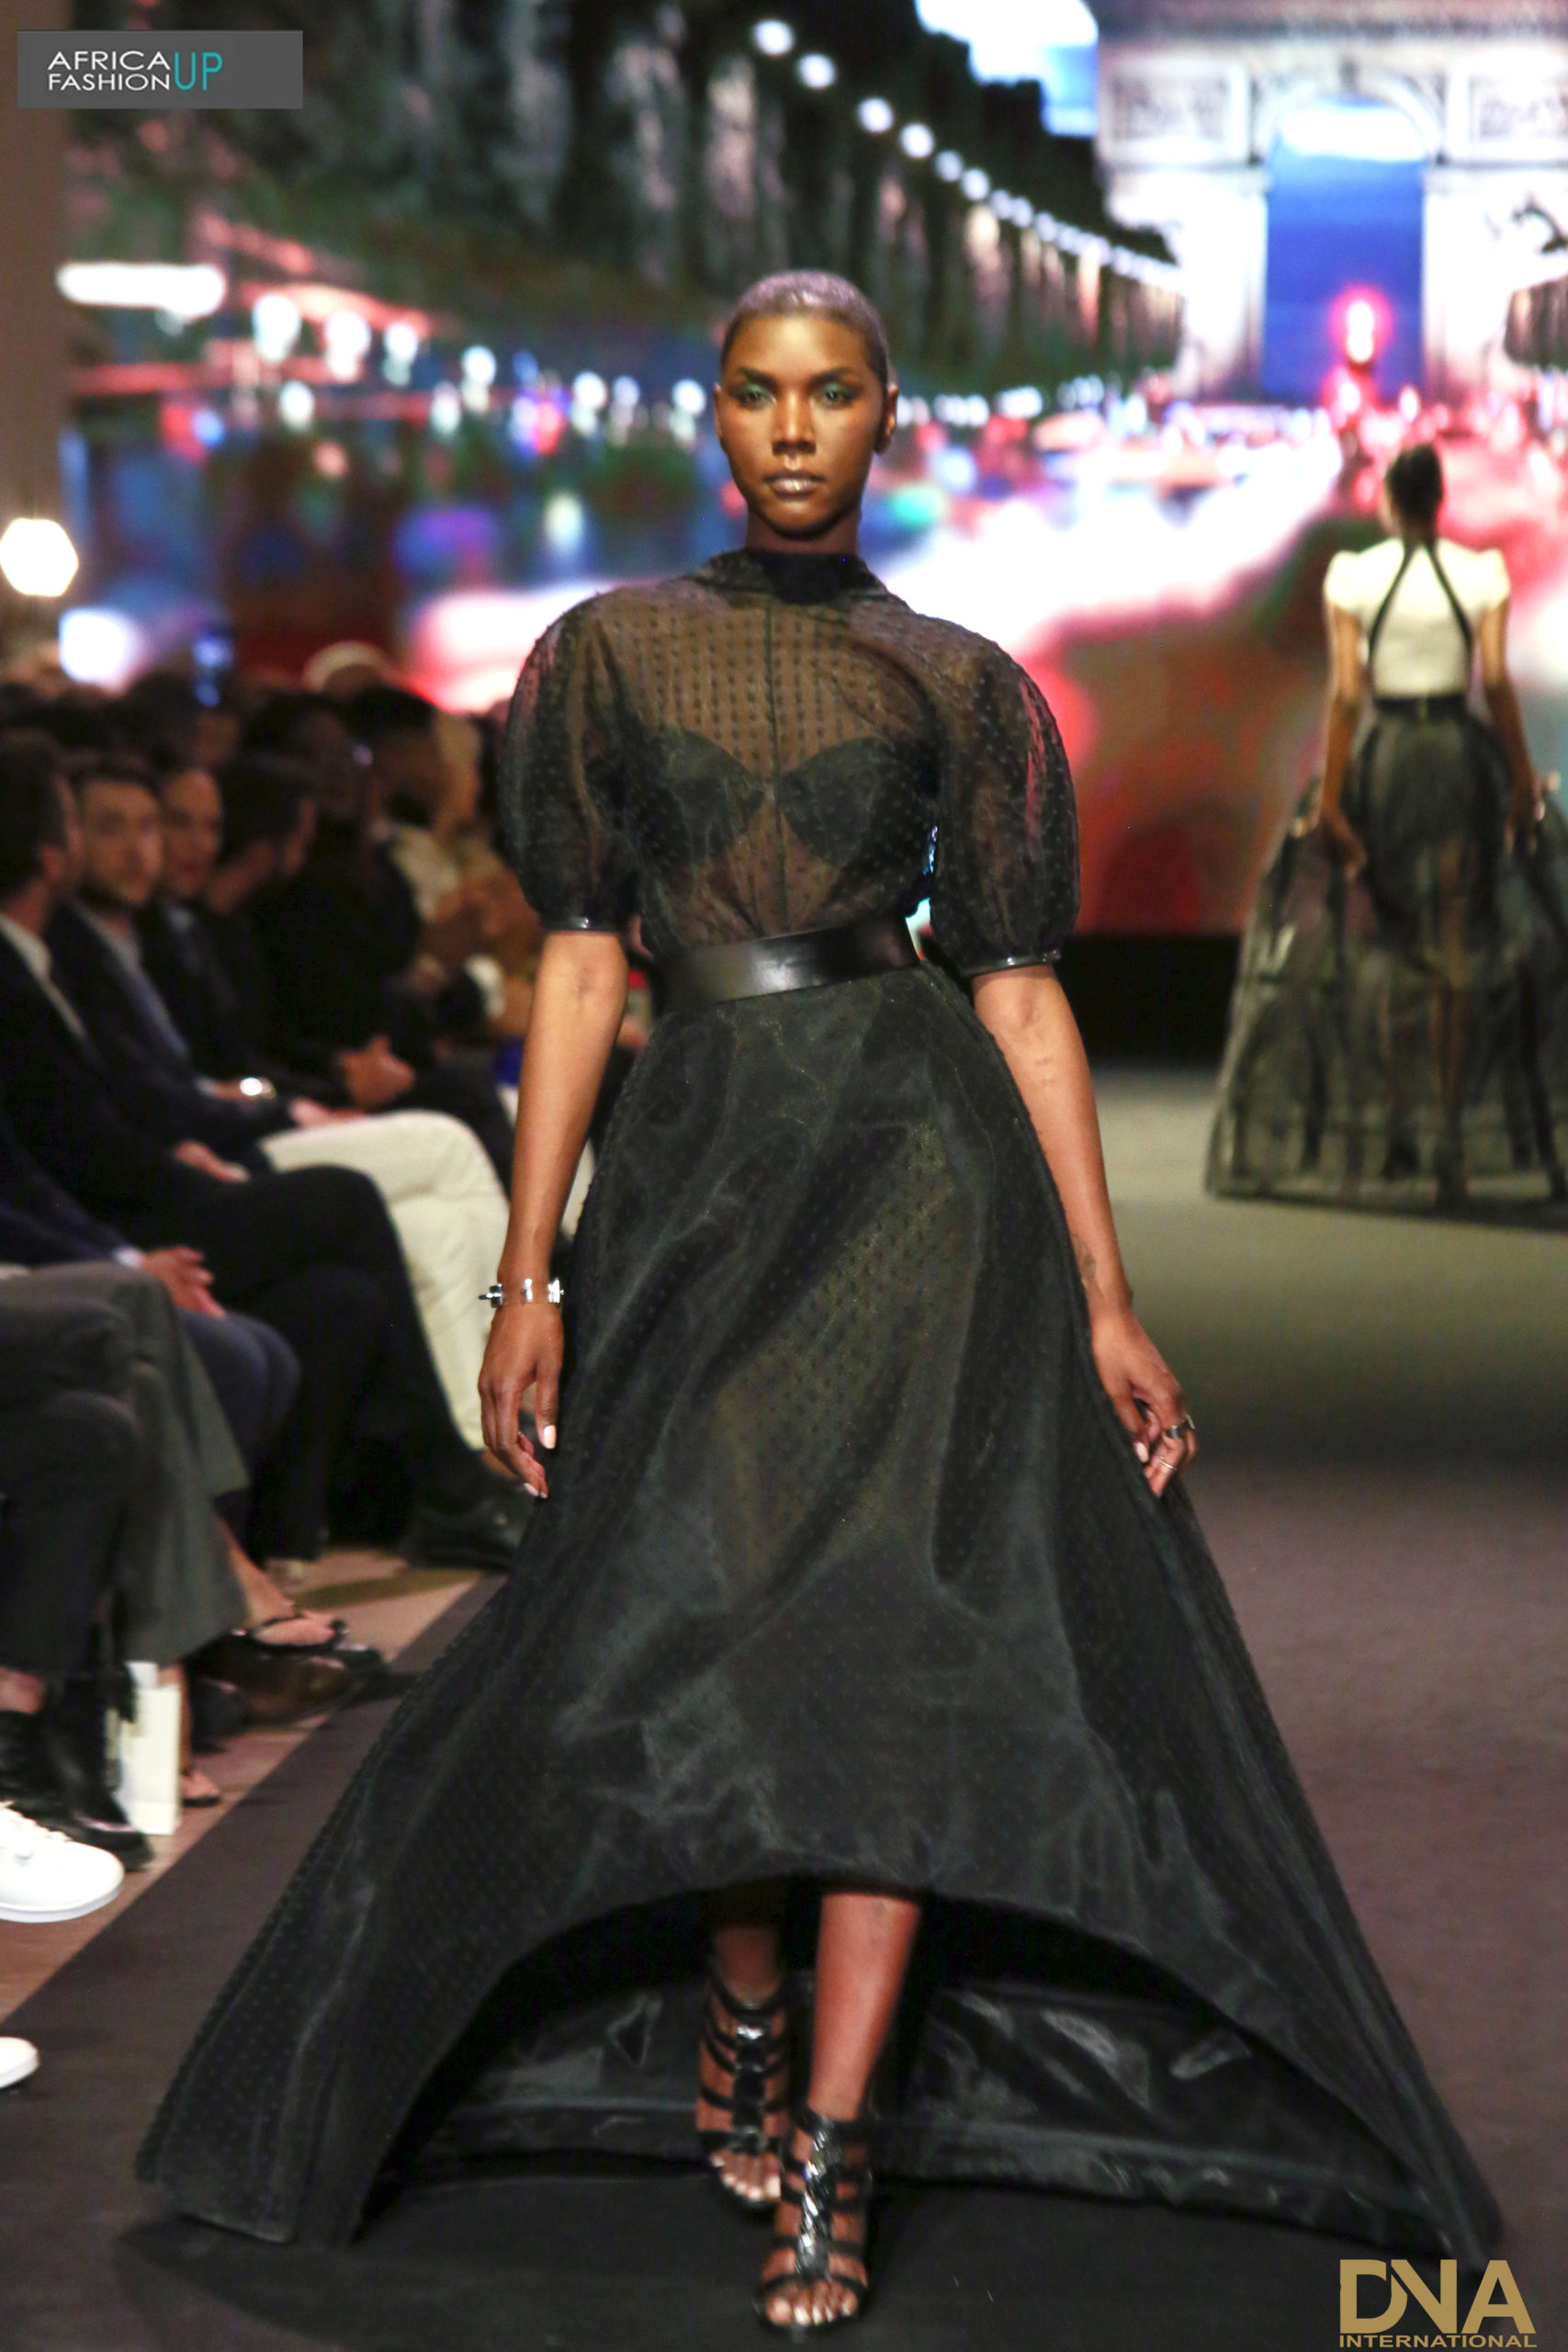 AFRICA-FASHION-UP-EDITION-2-CLARISSE-HIERAIX-COUTURE-PARIS-DN-AFRICA-DNA-INTERNATIONAL-MEDIA-PARTNER-MD0A1933